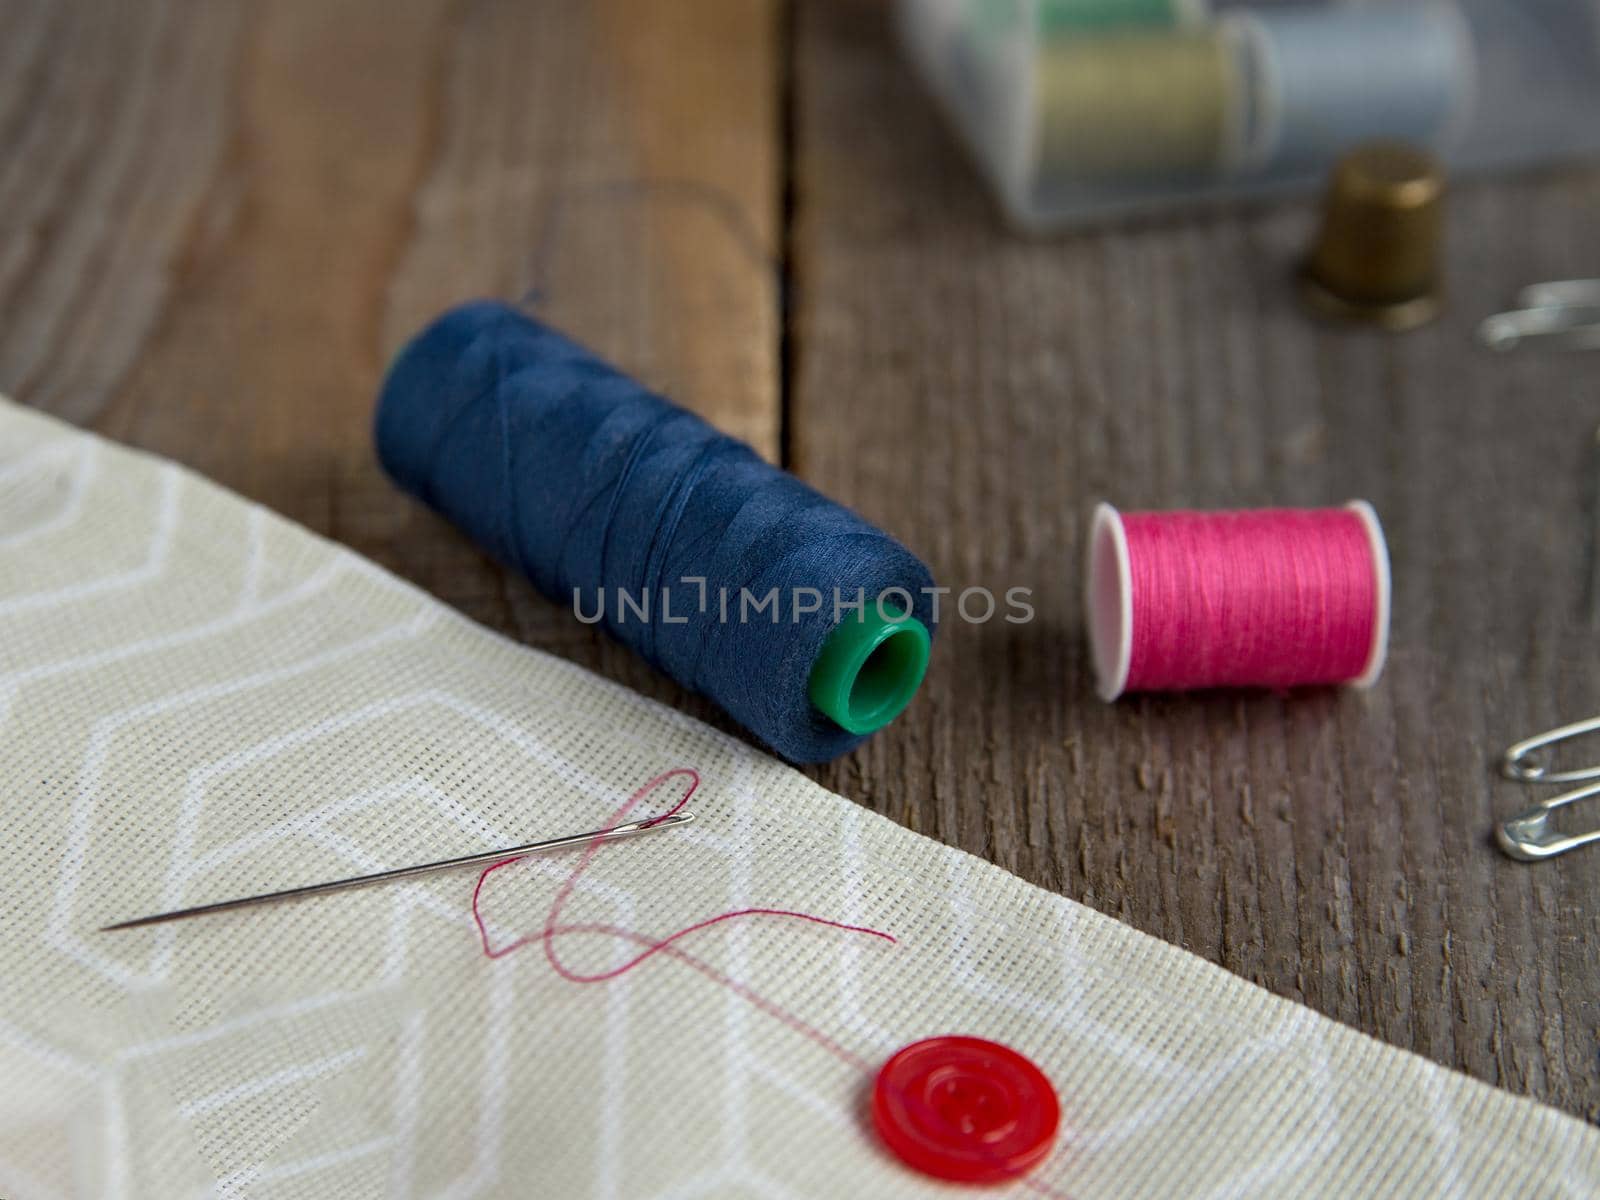 Coils with red and blue threads, needle with thread, gray fabric on brown wooden boards. Selective focus